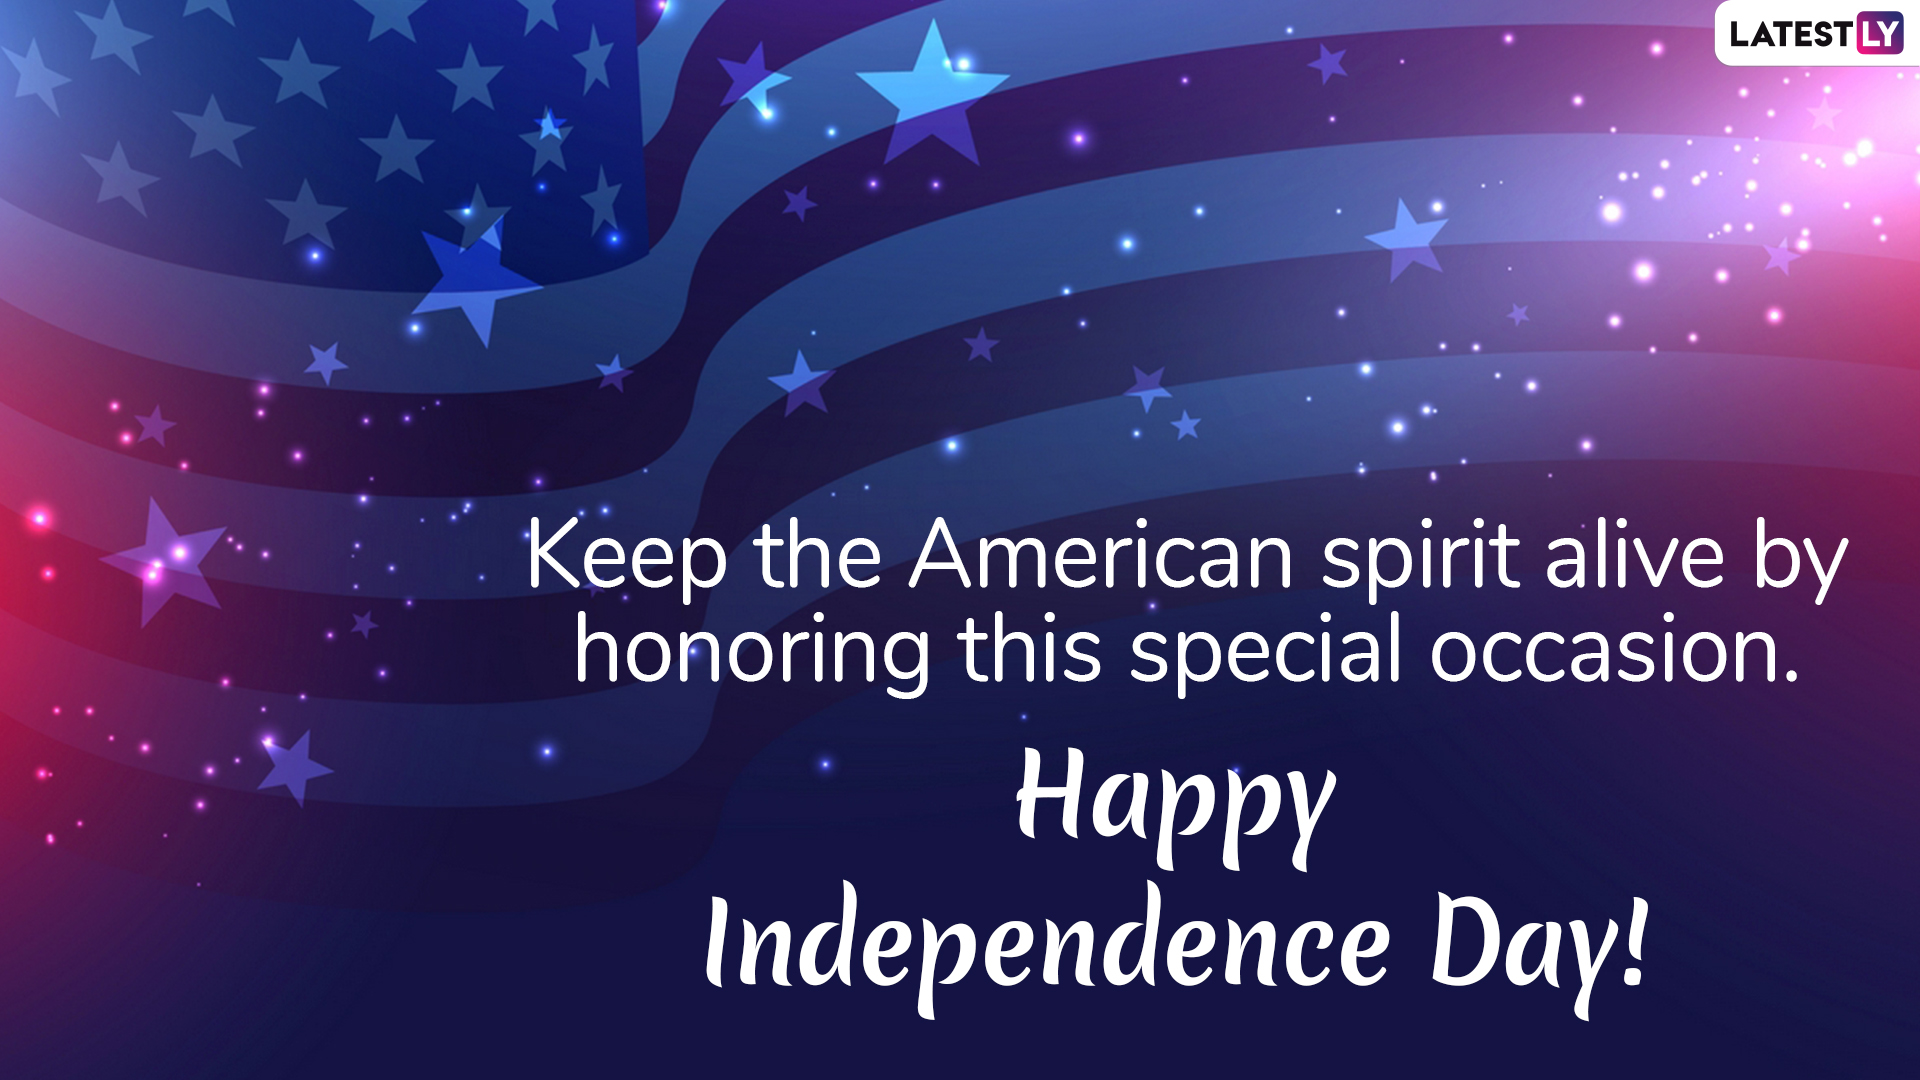 Happy Fourth Of July 2019 Greetings Whatsapp Stickers Gif Image Messages Patriotic Quotes Sms To Wish On American Independence Day Latestly